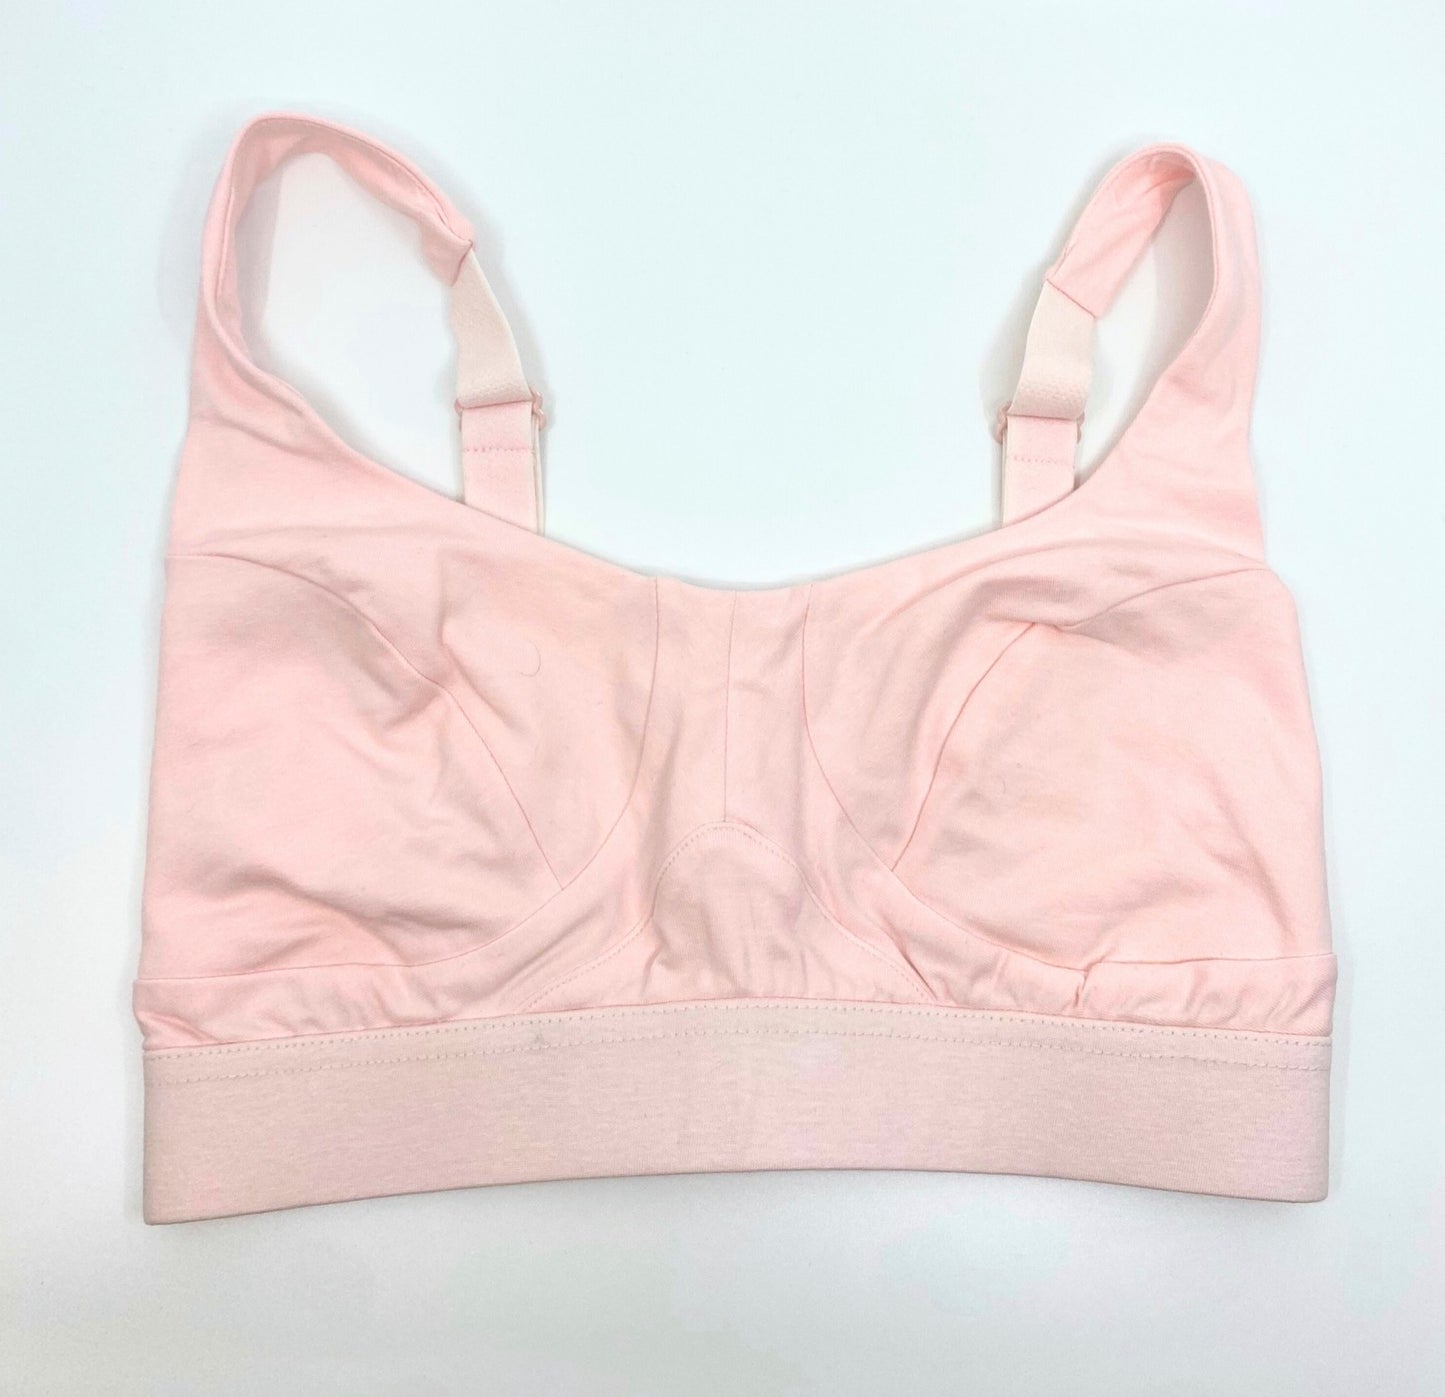 Women's organic cotton bra in light pink - more supportive style